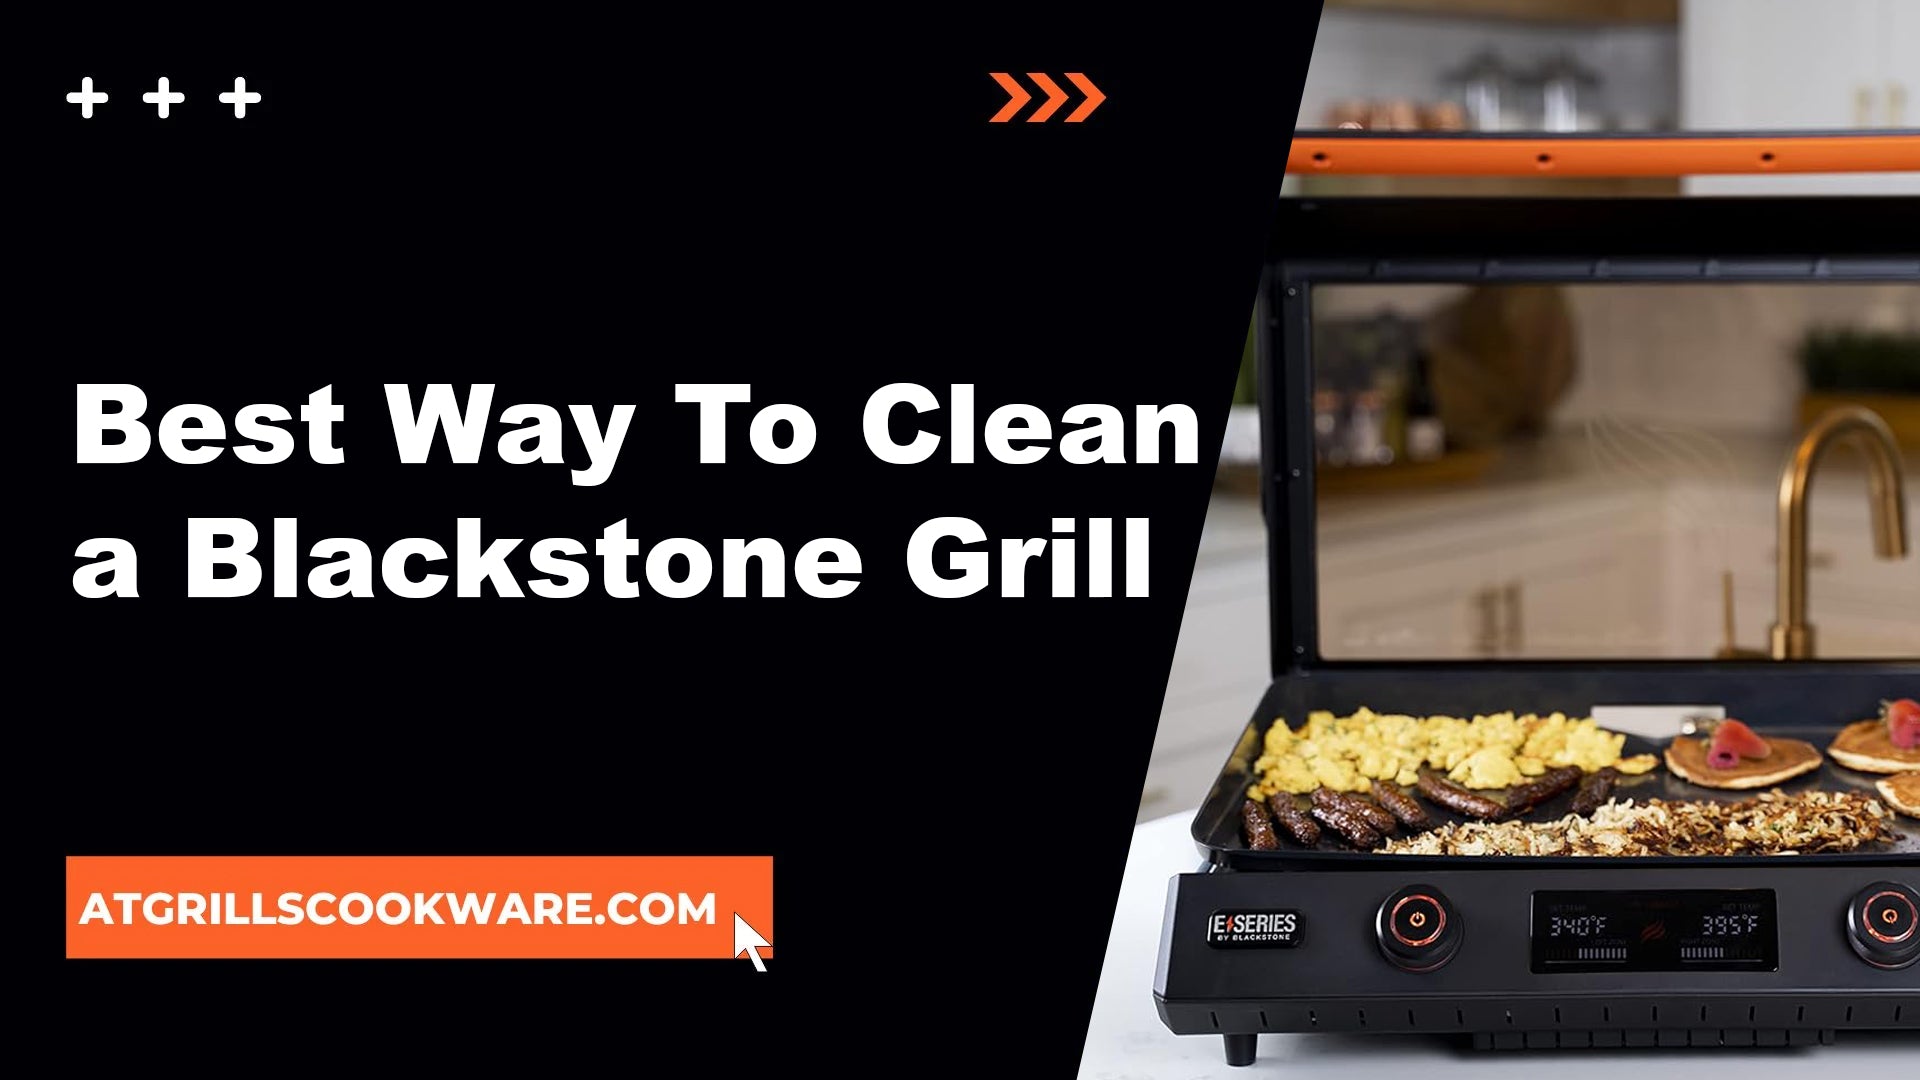 The Ultimate Guide: Best Way To a Blackstone Grill